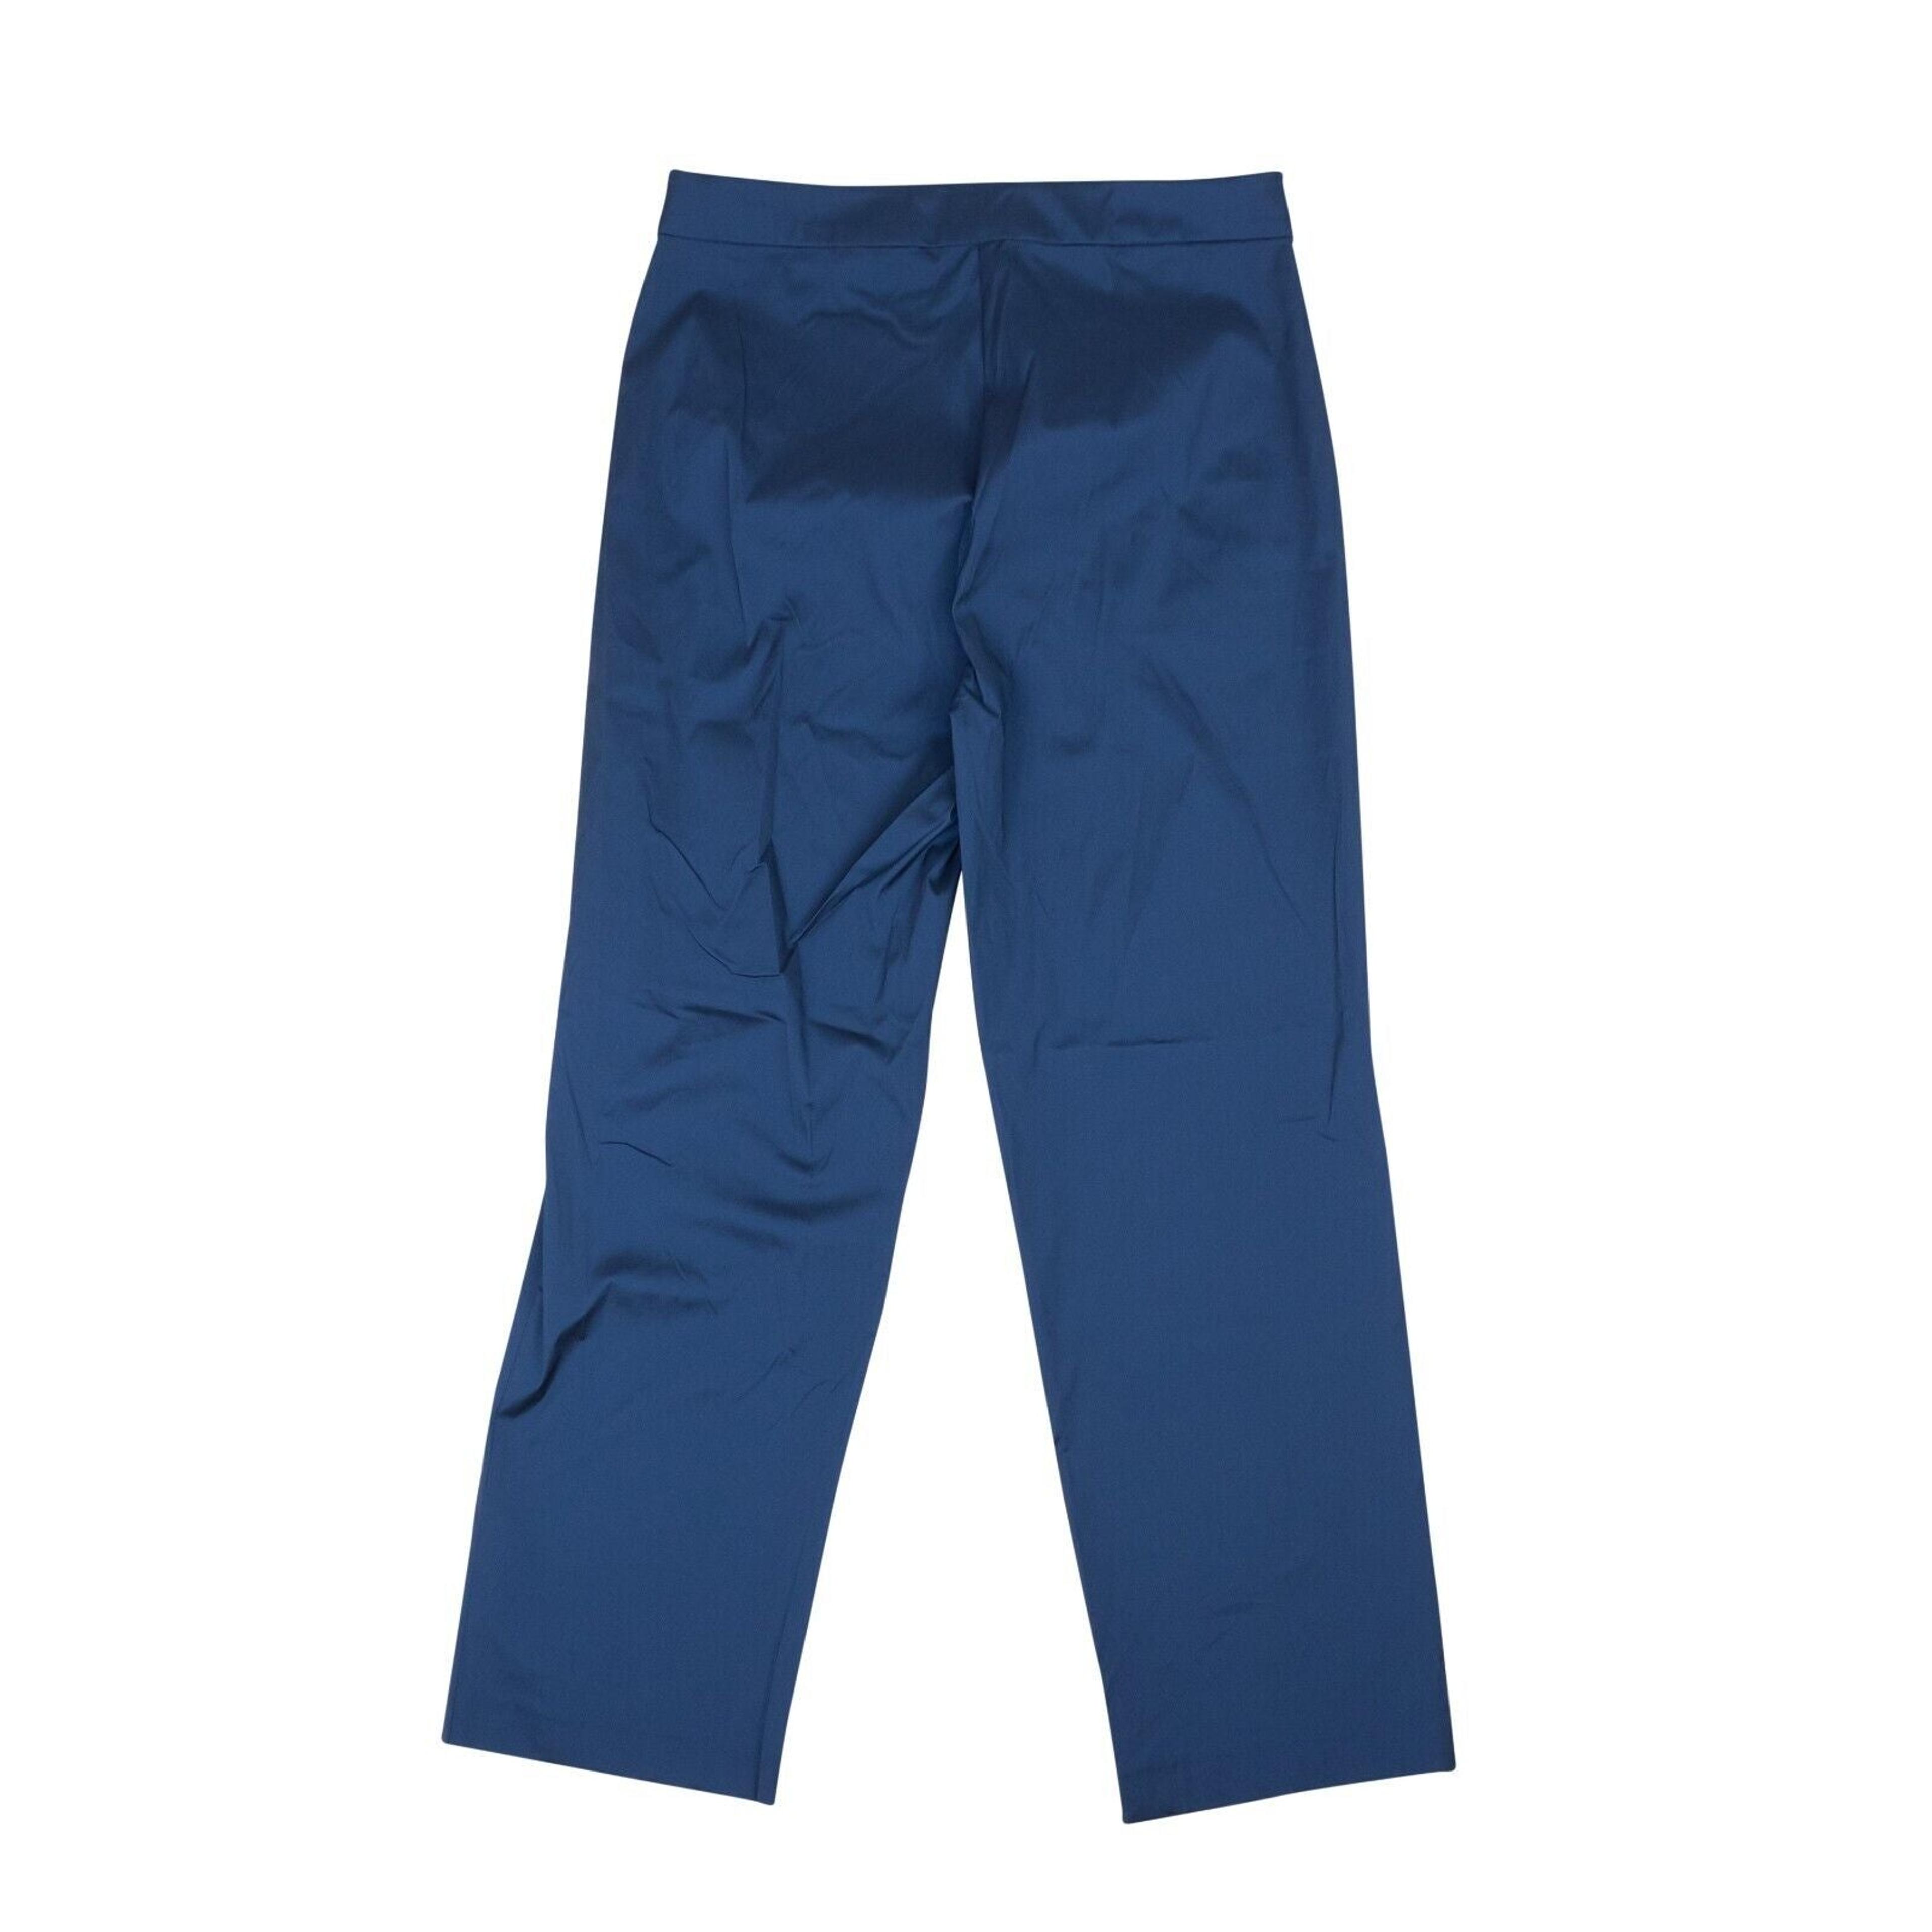 Alternate View 2 of Navy Blue Stretchy Baby Cigarette Pants